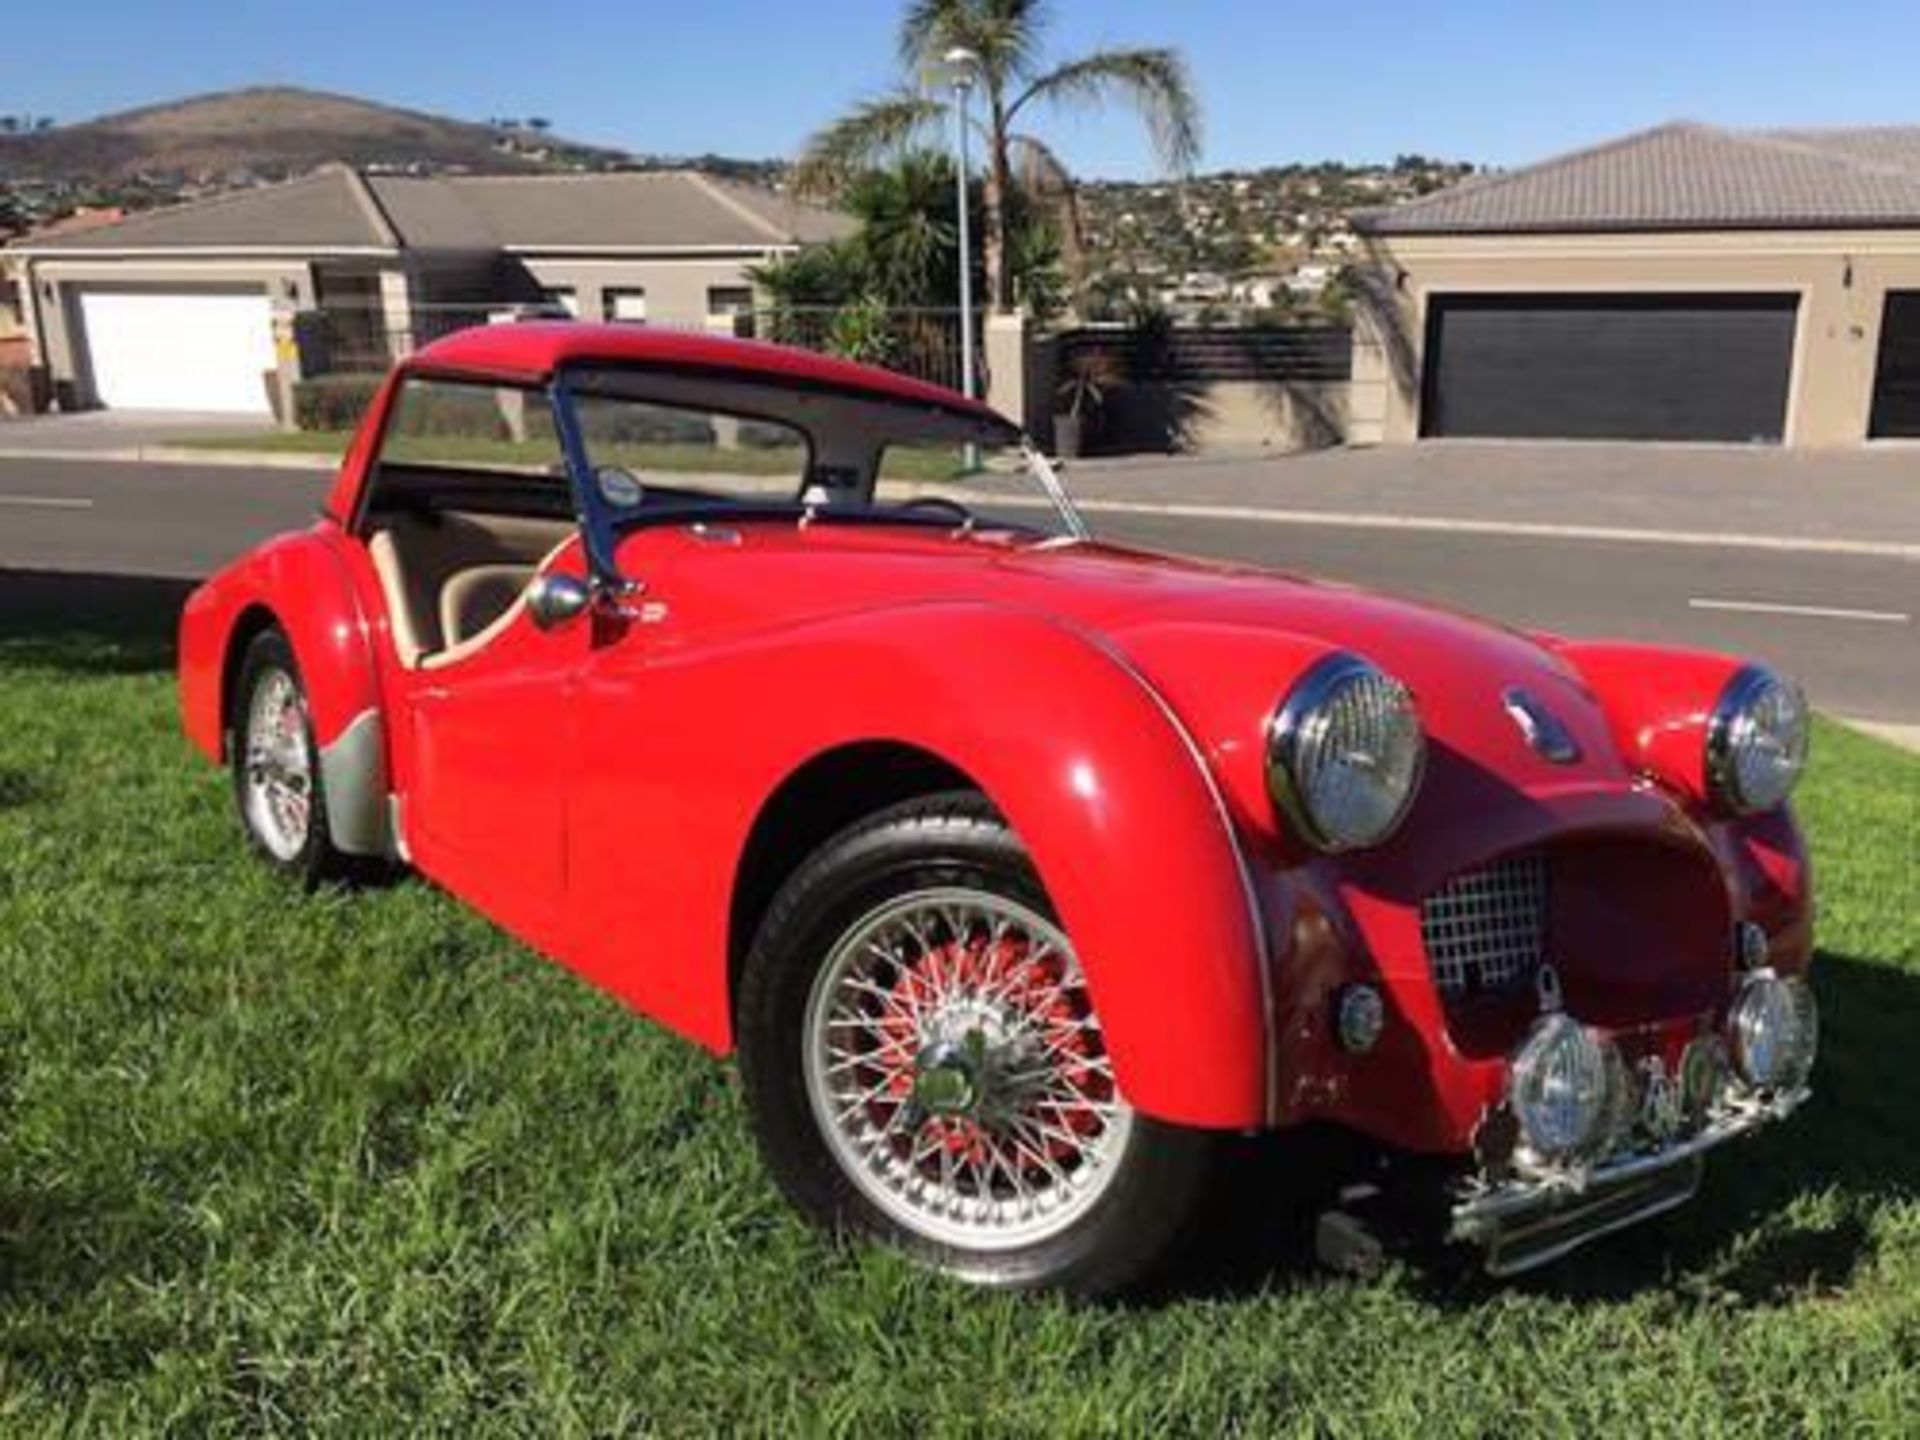 1954 Triumph TR2 Roadster Complete With Hard Top {053693} - Image 4 of 18